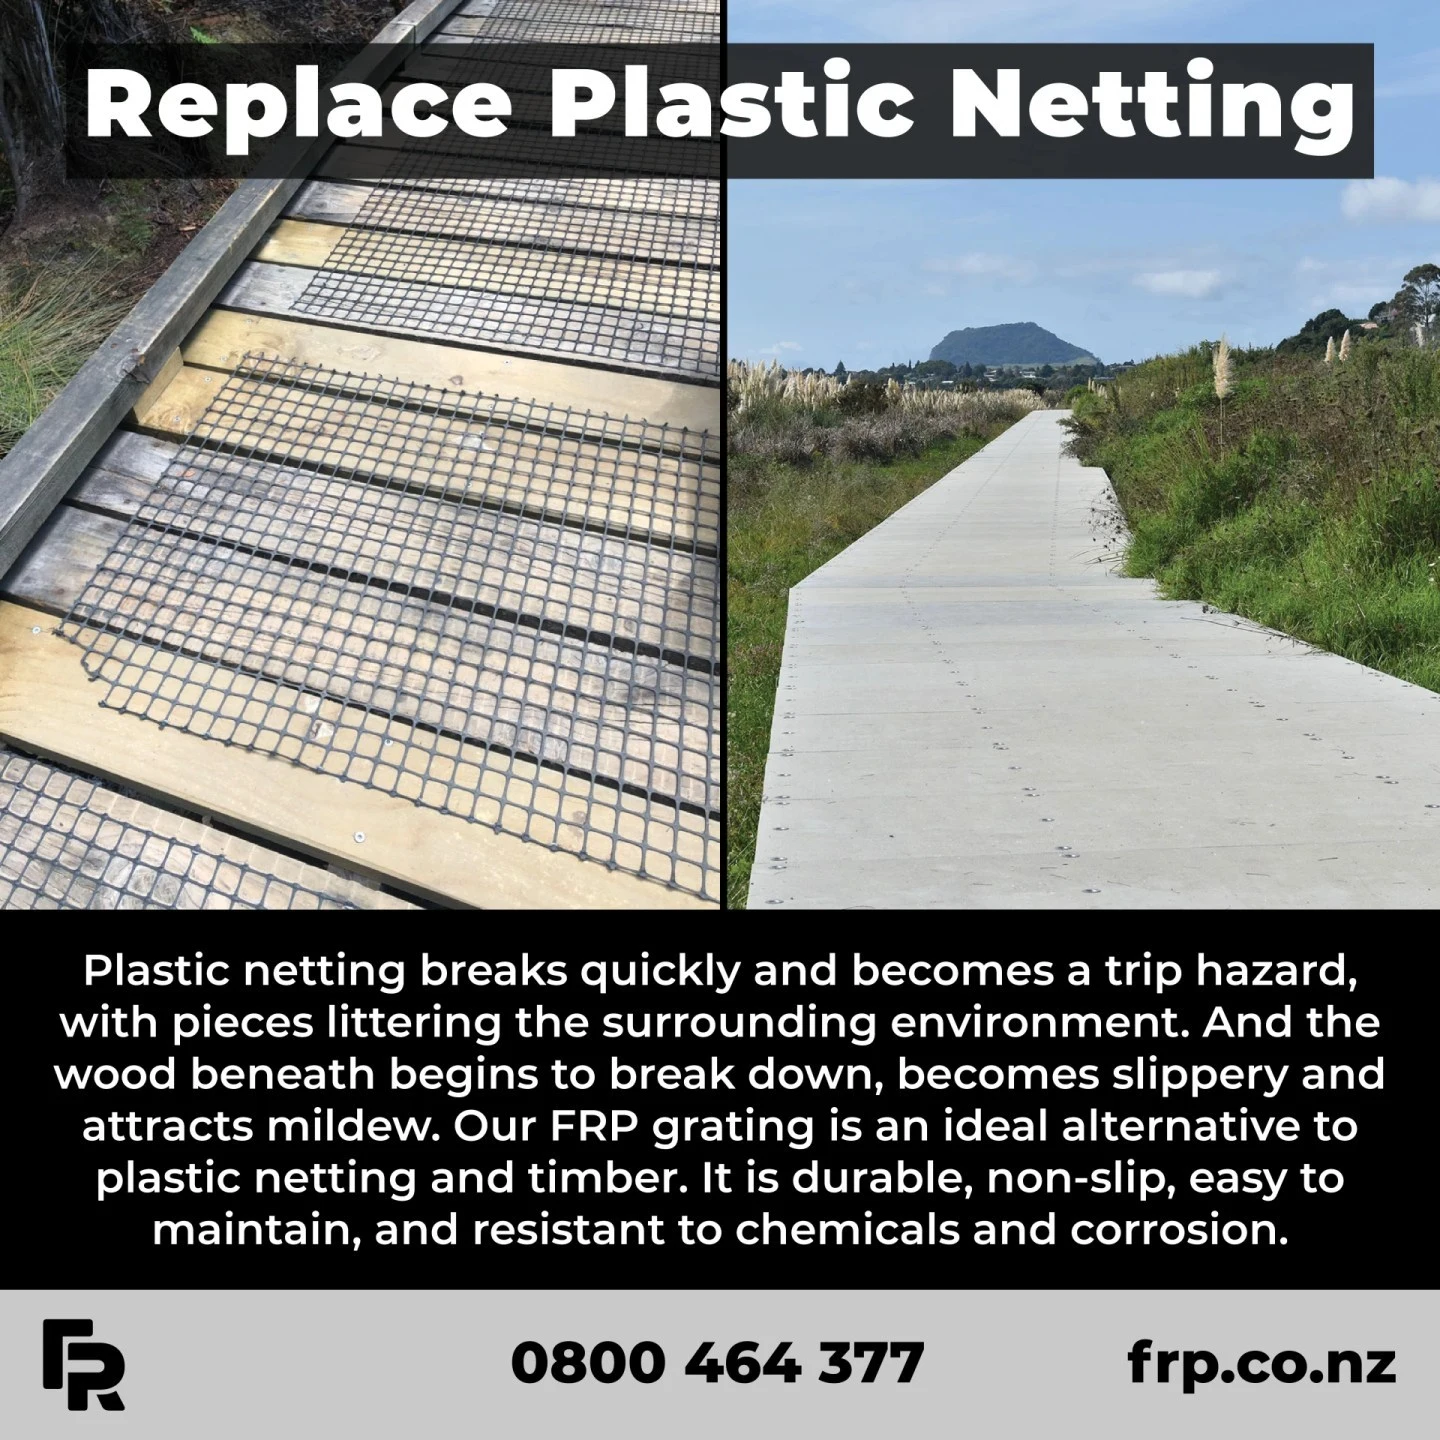 Planning an upgrade? Get in touch with us today!

#frp #frpproducts #walkways #cycleways #footpaths #commercial #marine #municipal #nzarchitects #councils #environment